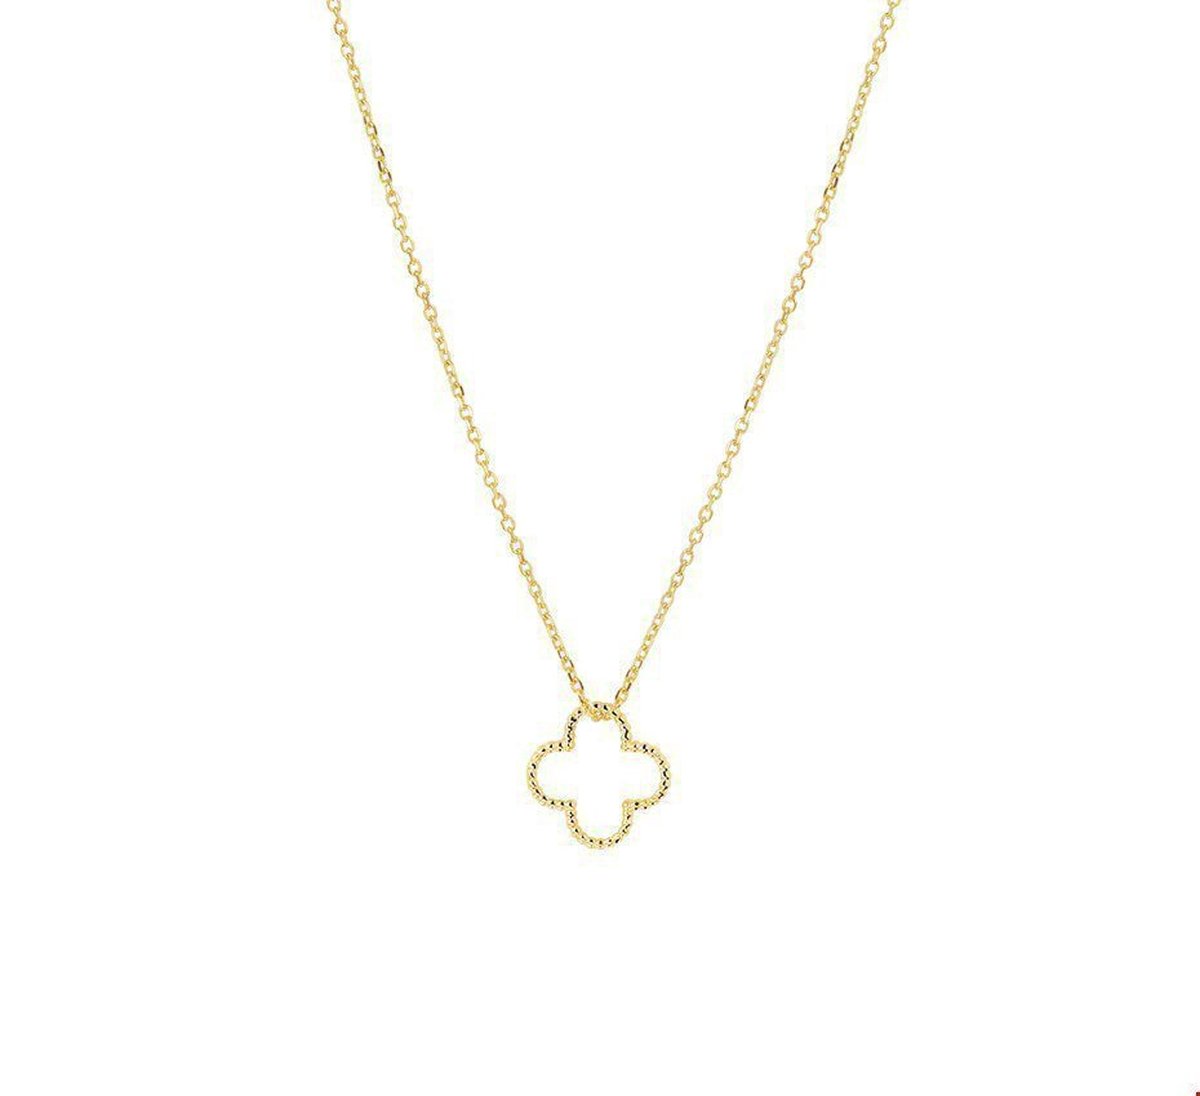 The Fashion Jewelry Collection Ketting Bloem 0,8 mm 40 - 42 - 44 cm - Geelgoud